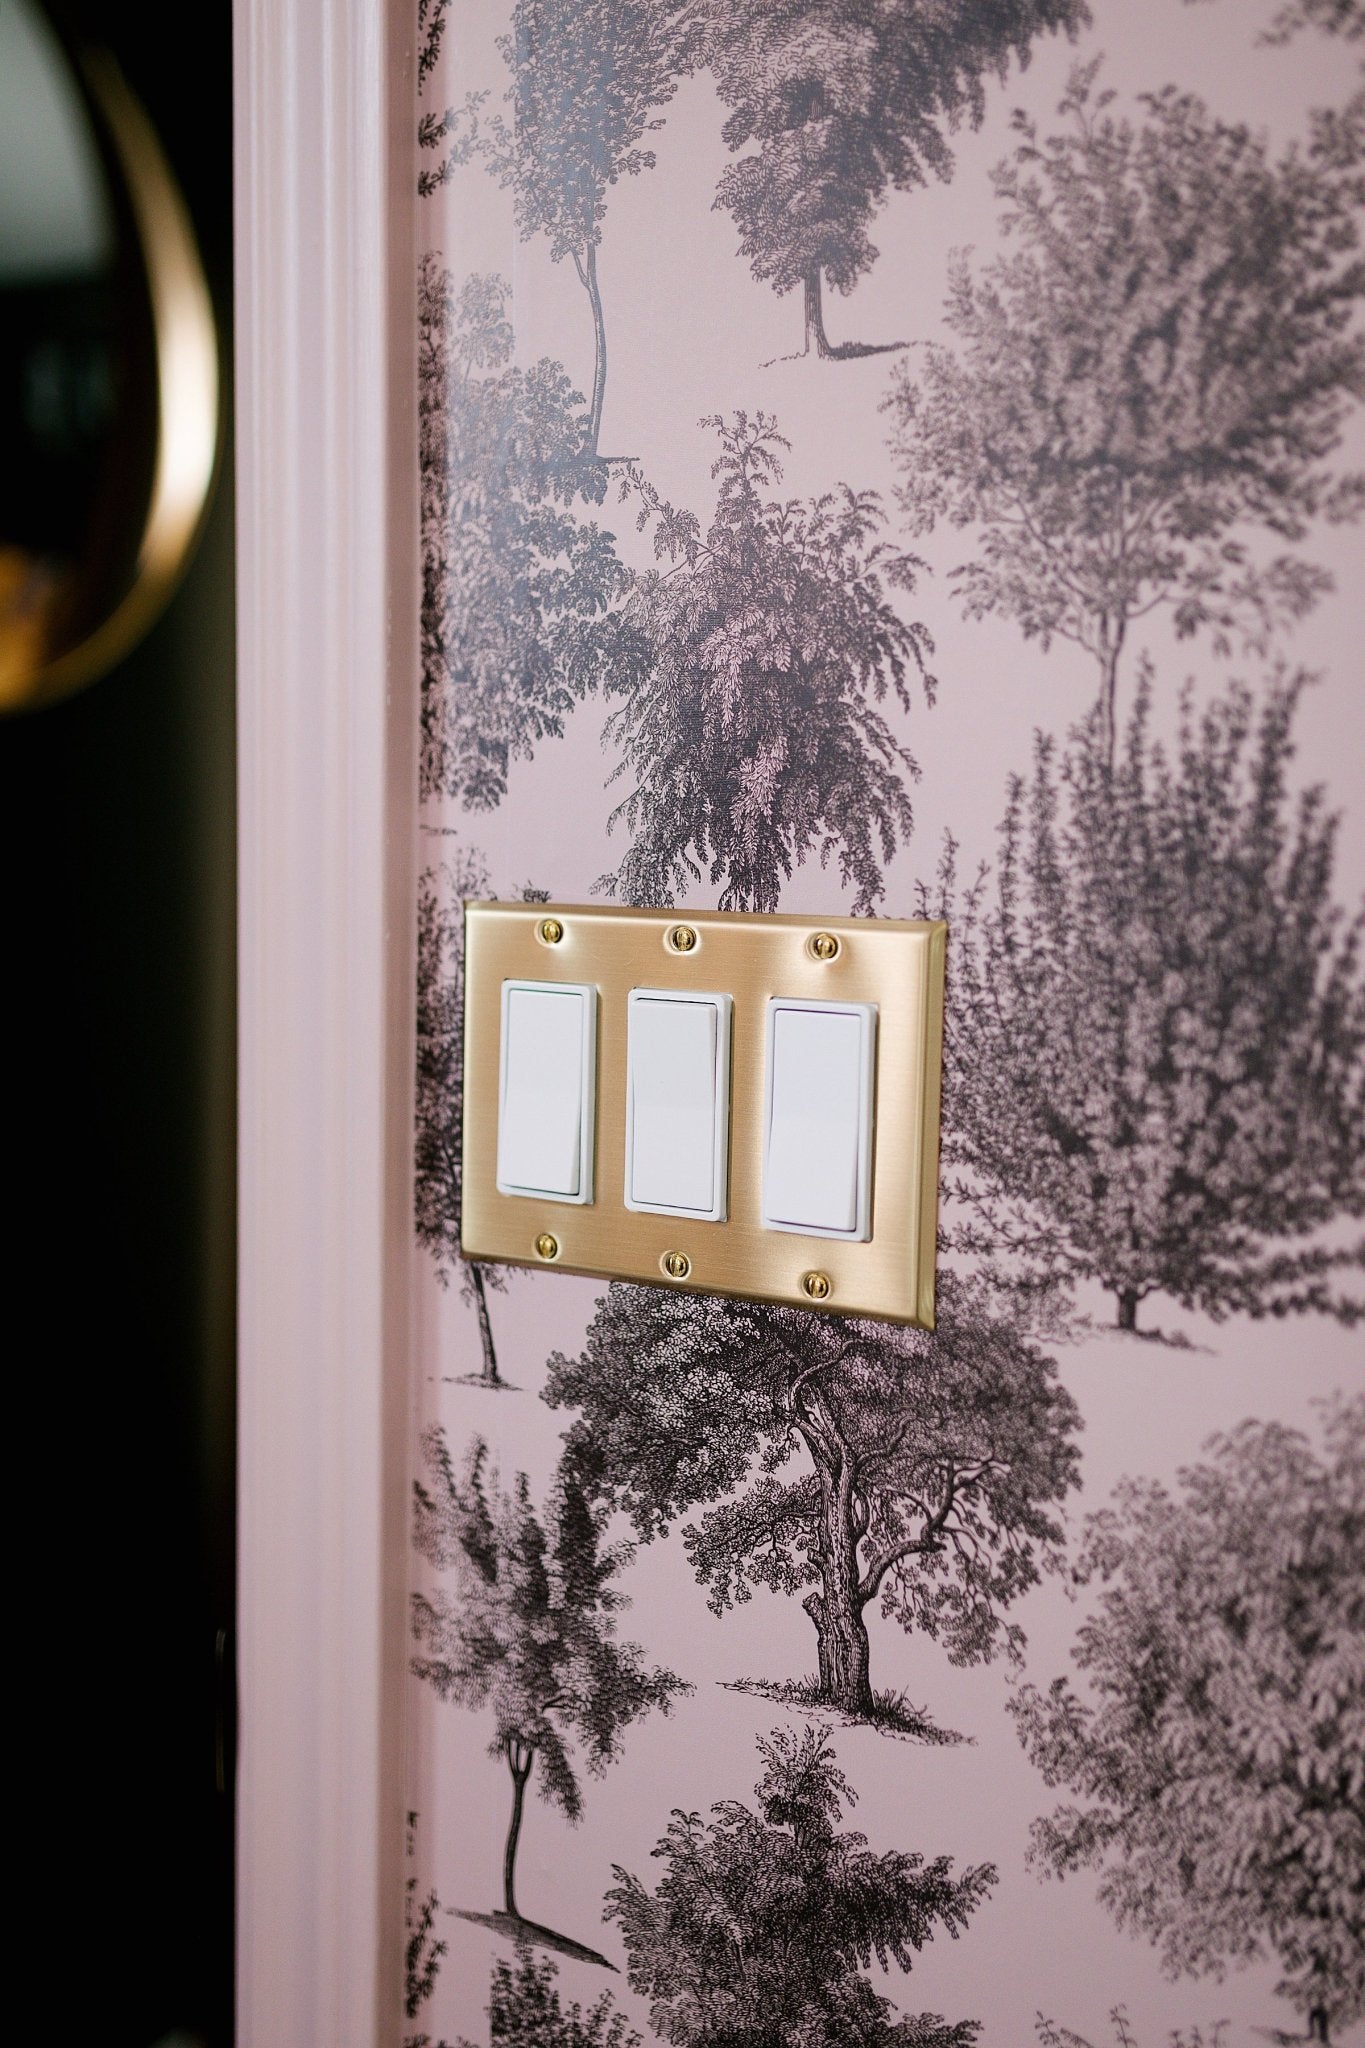 A light switch with three white switches on a brass plate against a toile wallpaper with pink trees and foliage.